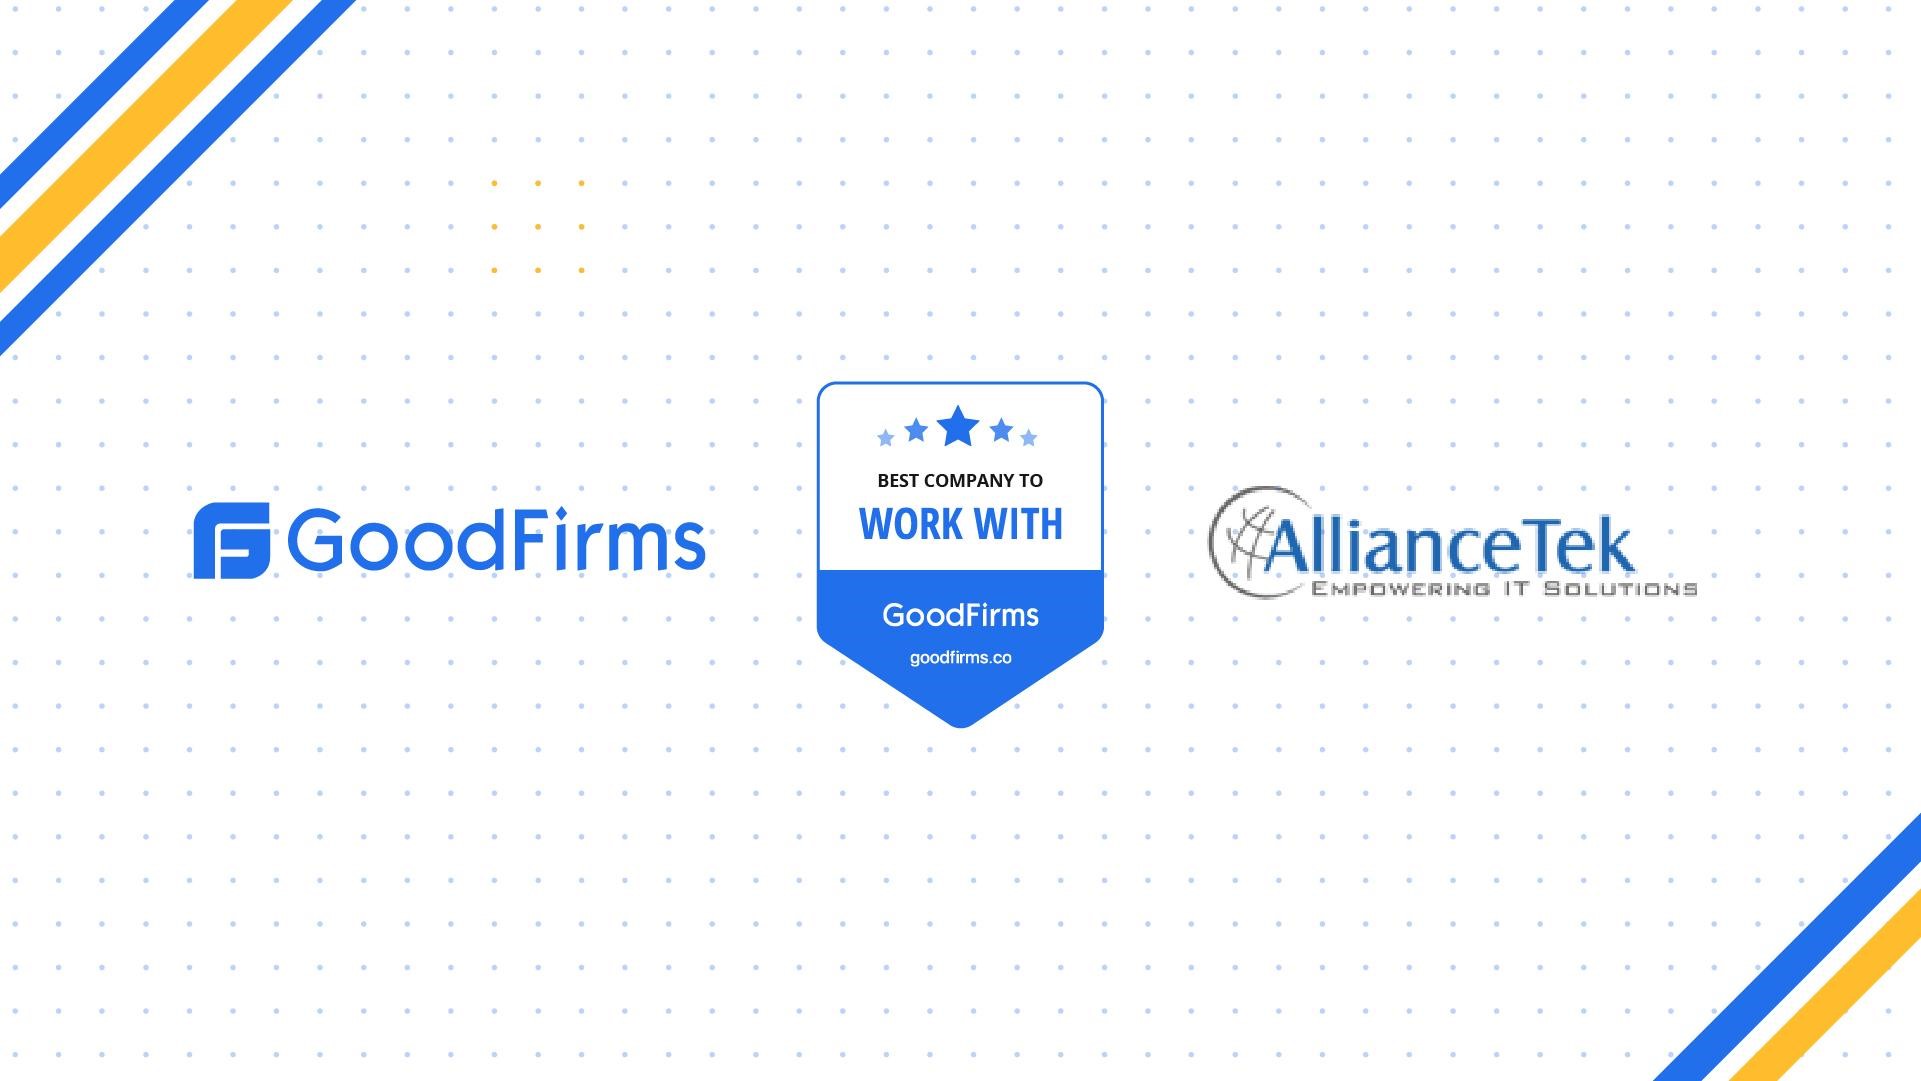 AllianceTek recognized by GoodFirms as the Best Company to Work With